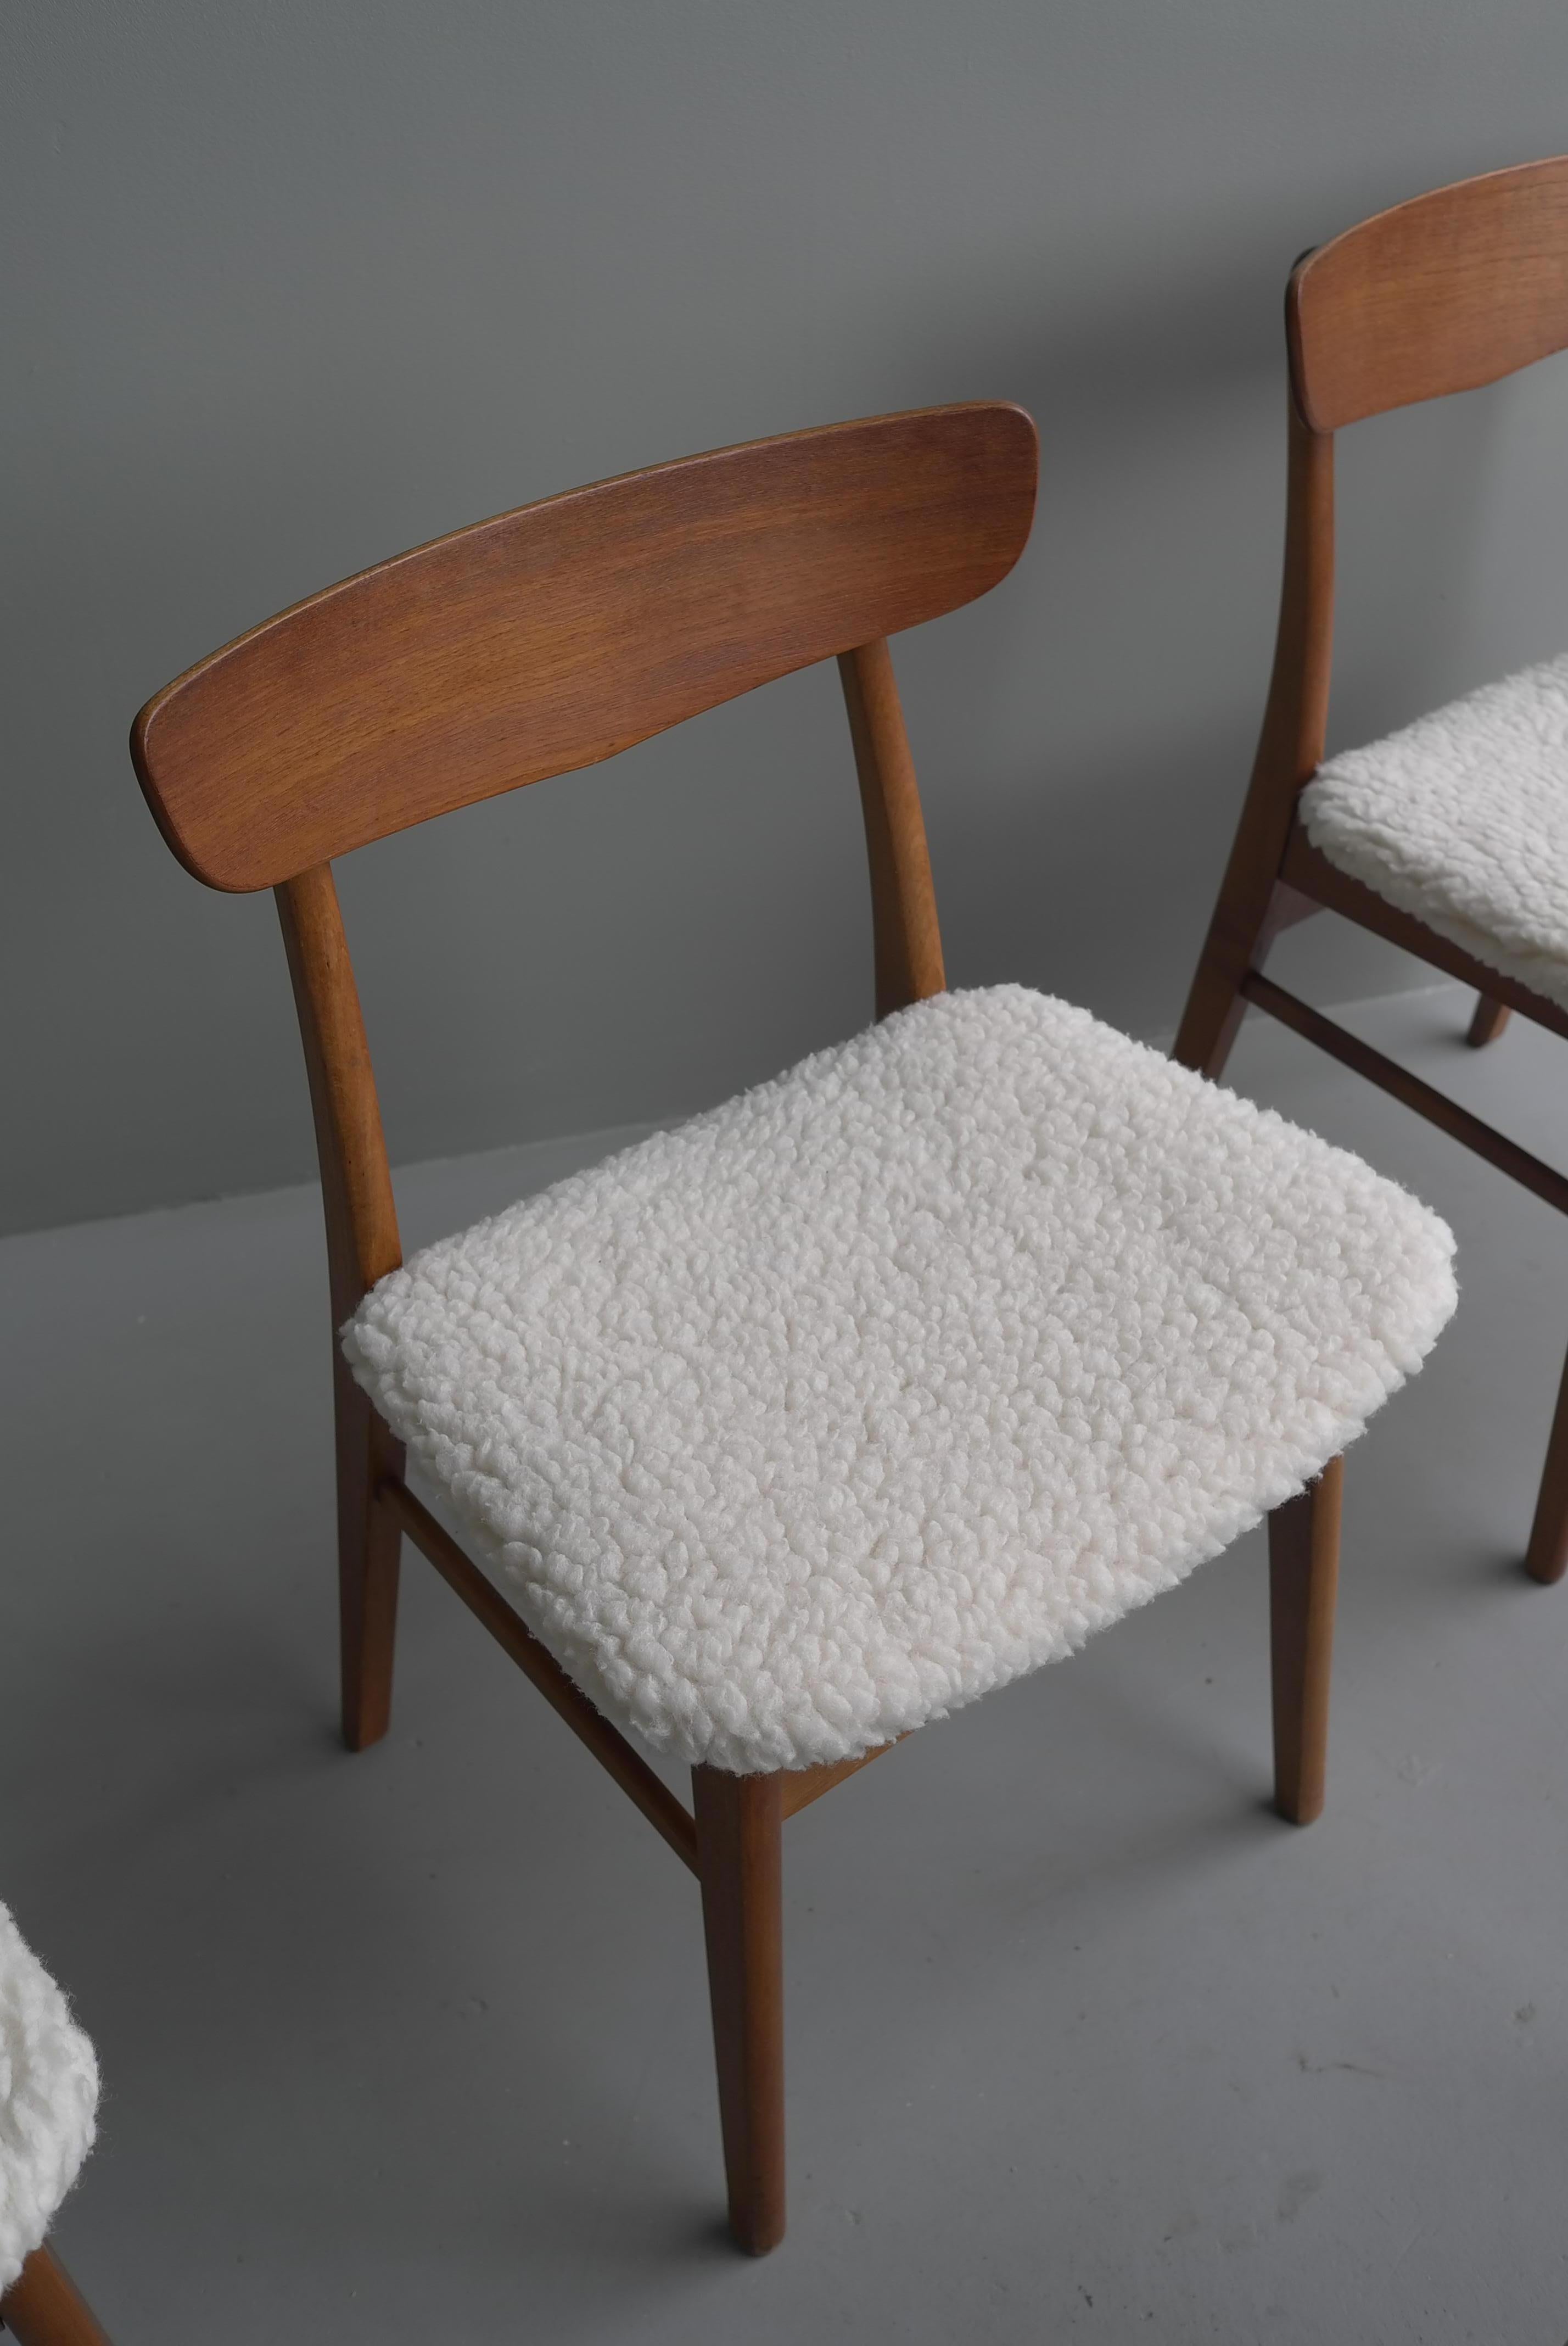 Six Teak Danish Heart Chairs with Seats in Pure Merino Wool, by Farstrup Møbler 8